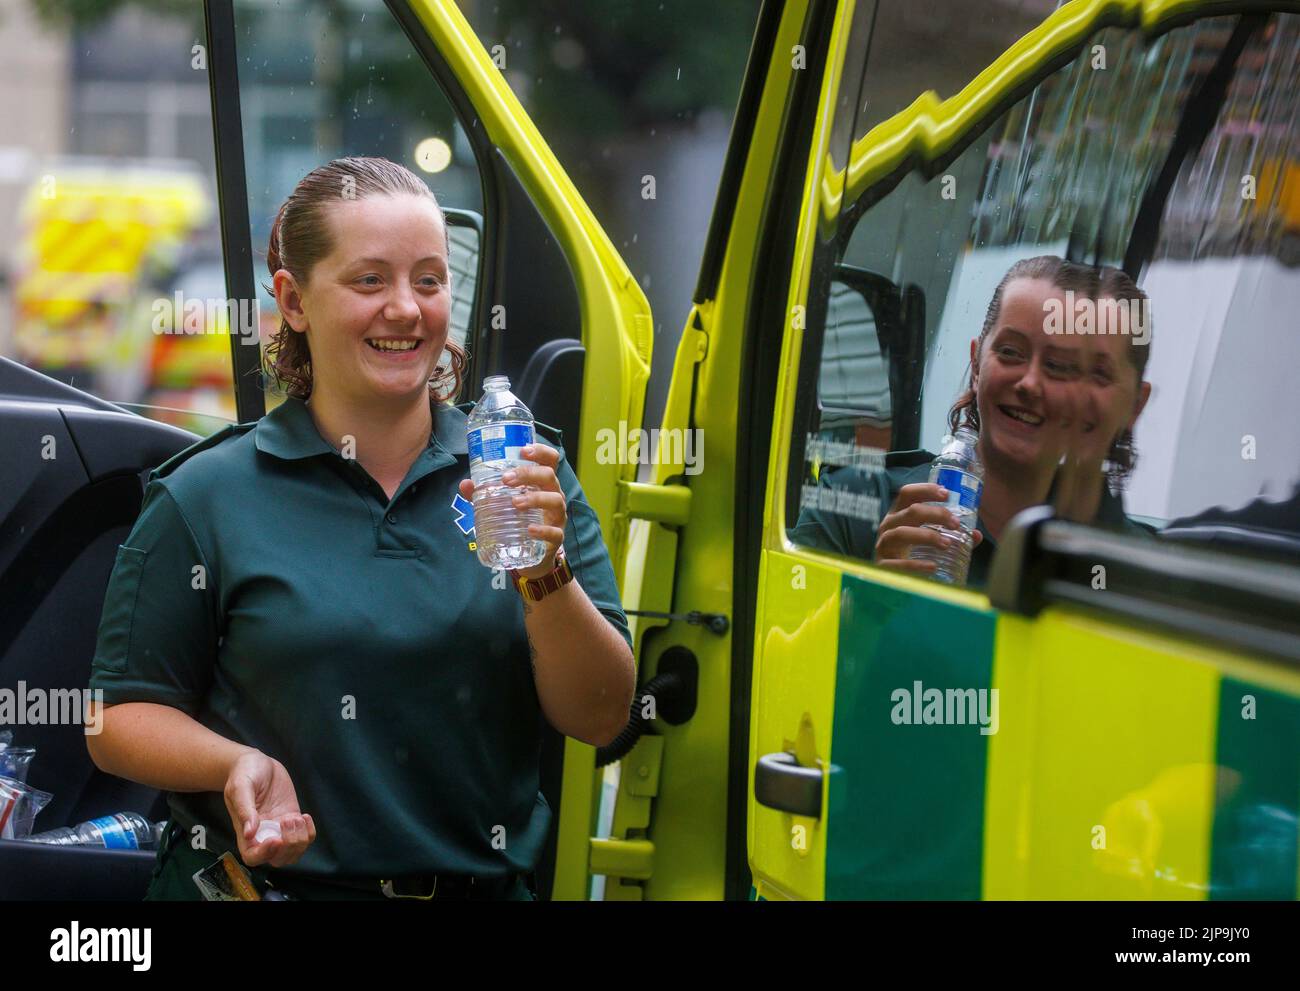 An ambulance worker takes a break during a shift during the hot summer weather. The ambulance service is under pressure with increased workload. Stock Photo